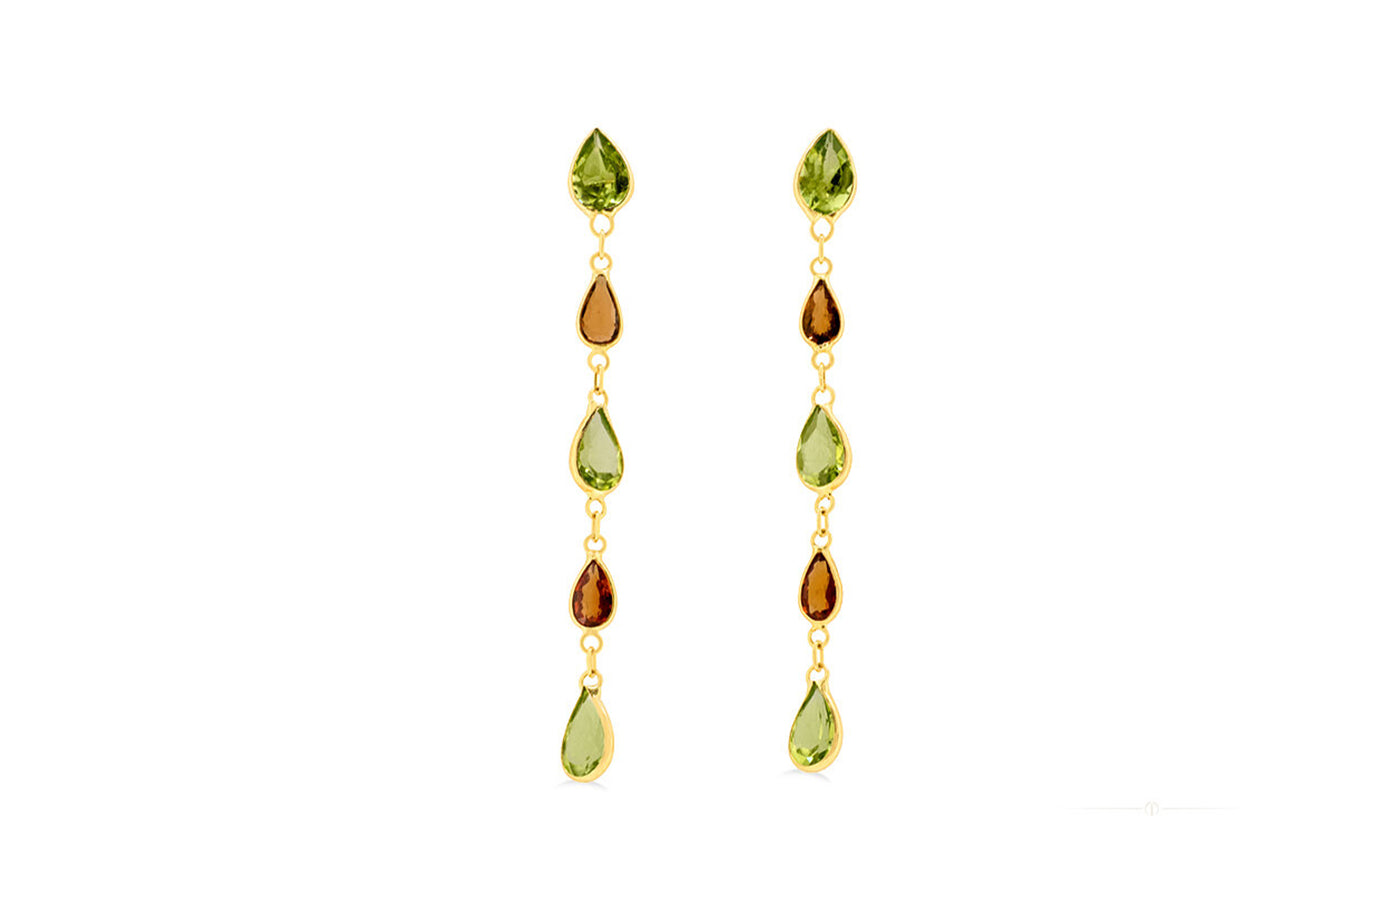 Autumn: Sapphire and Peridot Drop Earrings in Yellow Gold